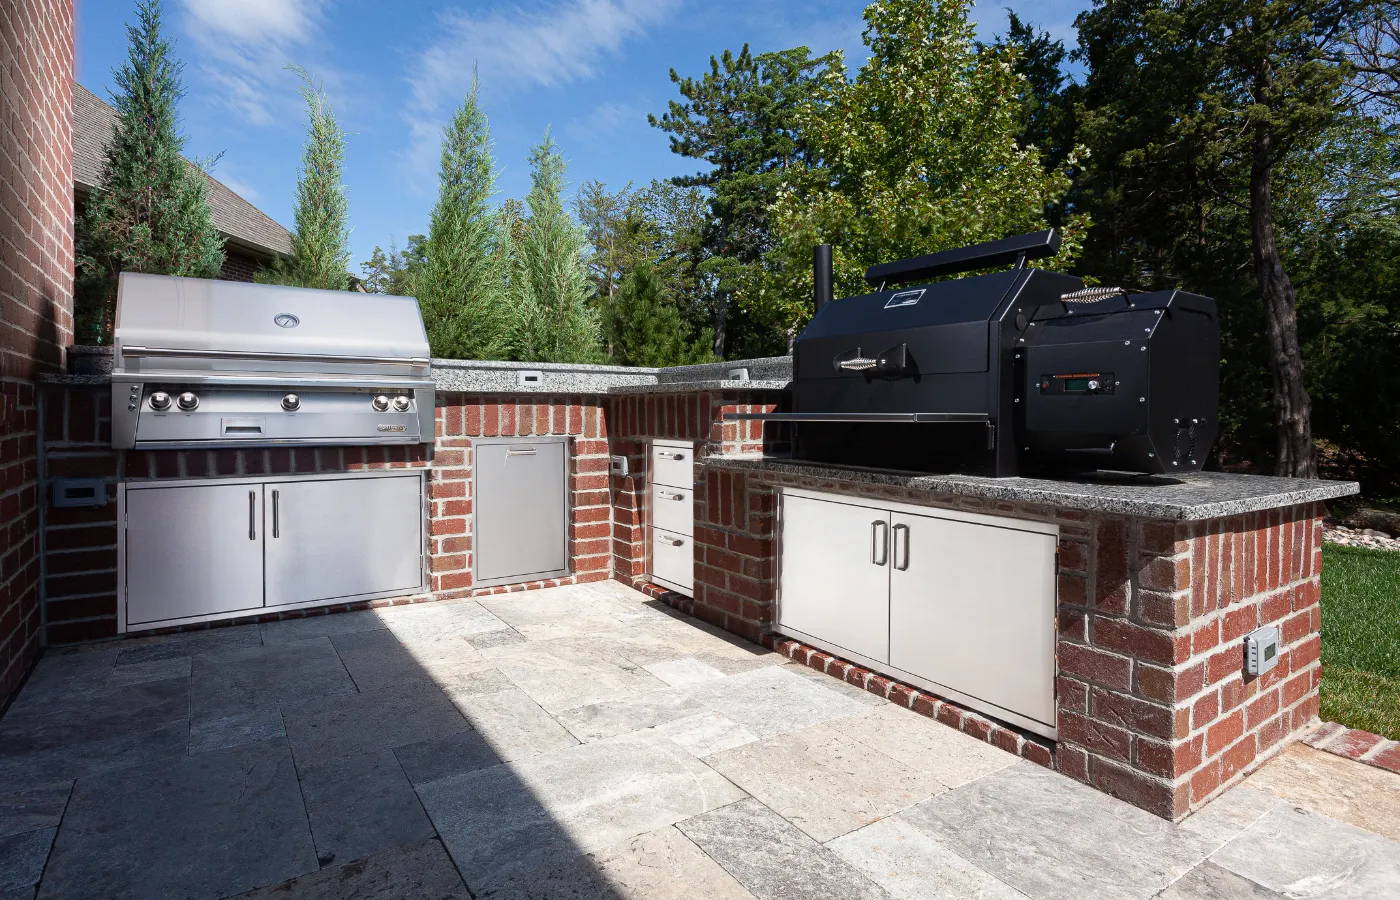 https://www.atbbq.com/pages/traditional-l-shaped-outdoor-kitchen